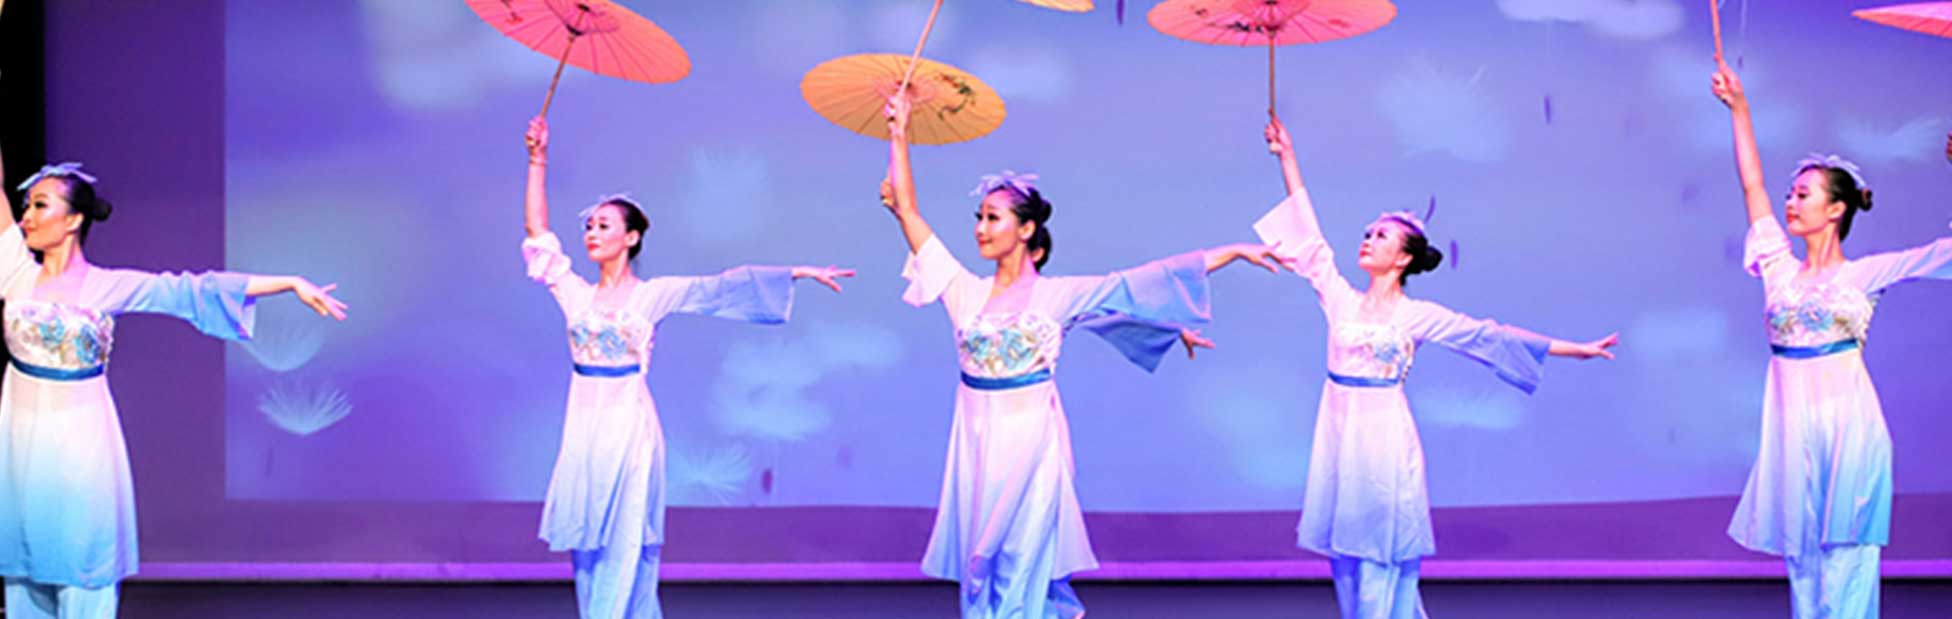 Chinese dancers in traditional costume holding umbrellas